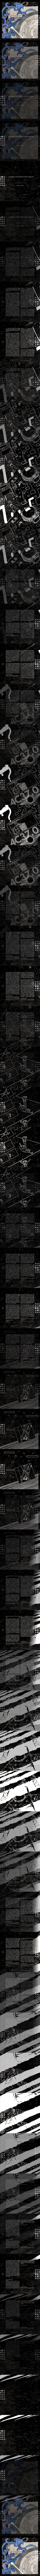 Black Space in Interactive Graphic Novel 